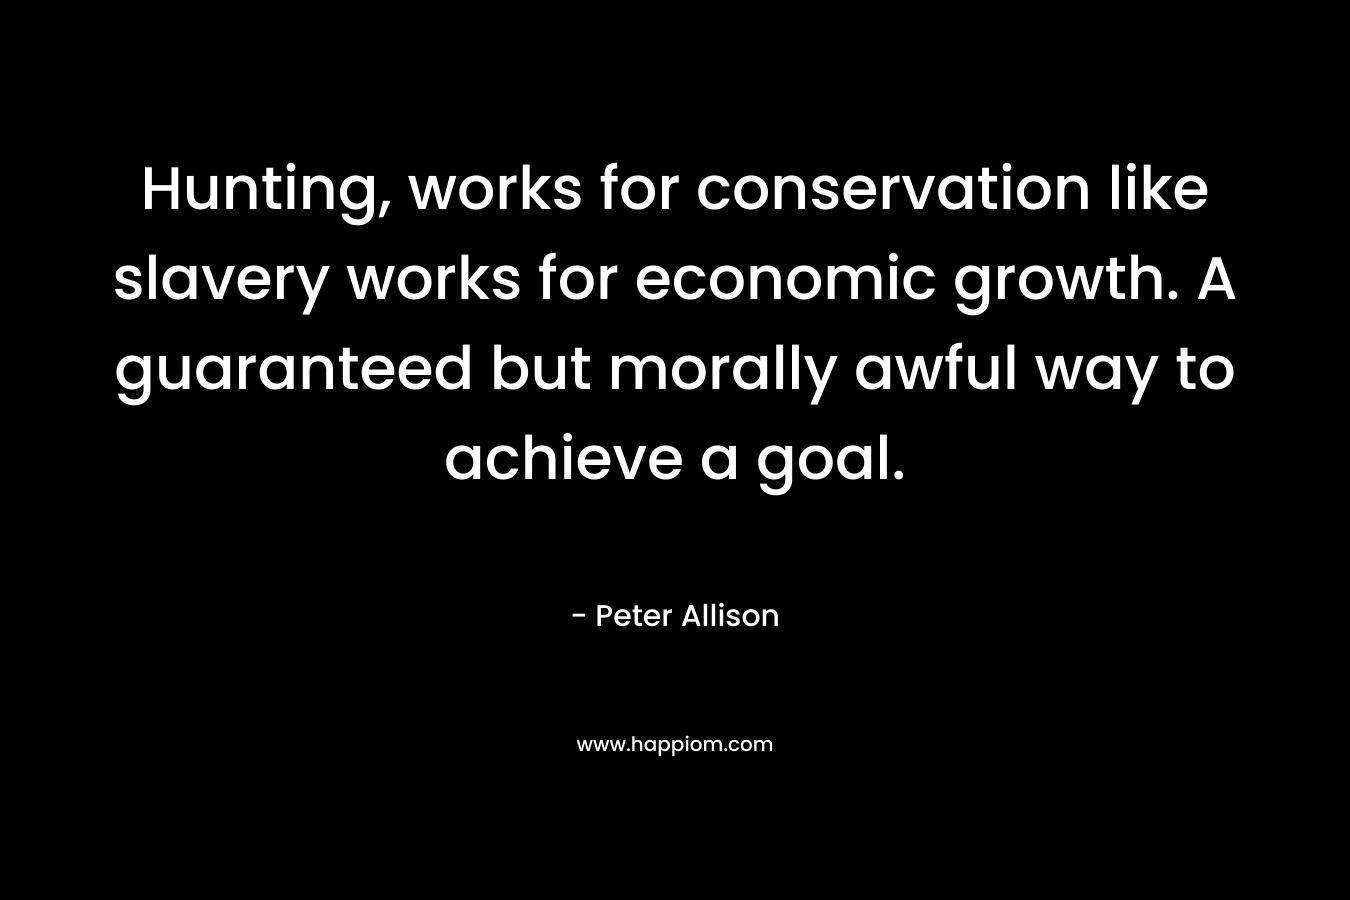 Hunting, works for conservation like slavery works for economic growth. A guaranteed but morally awful way to achieve a goal.